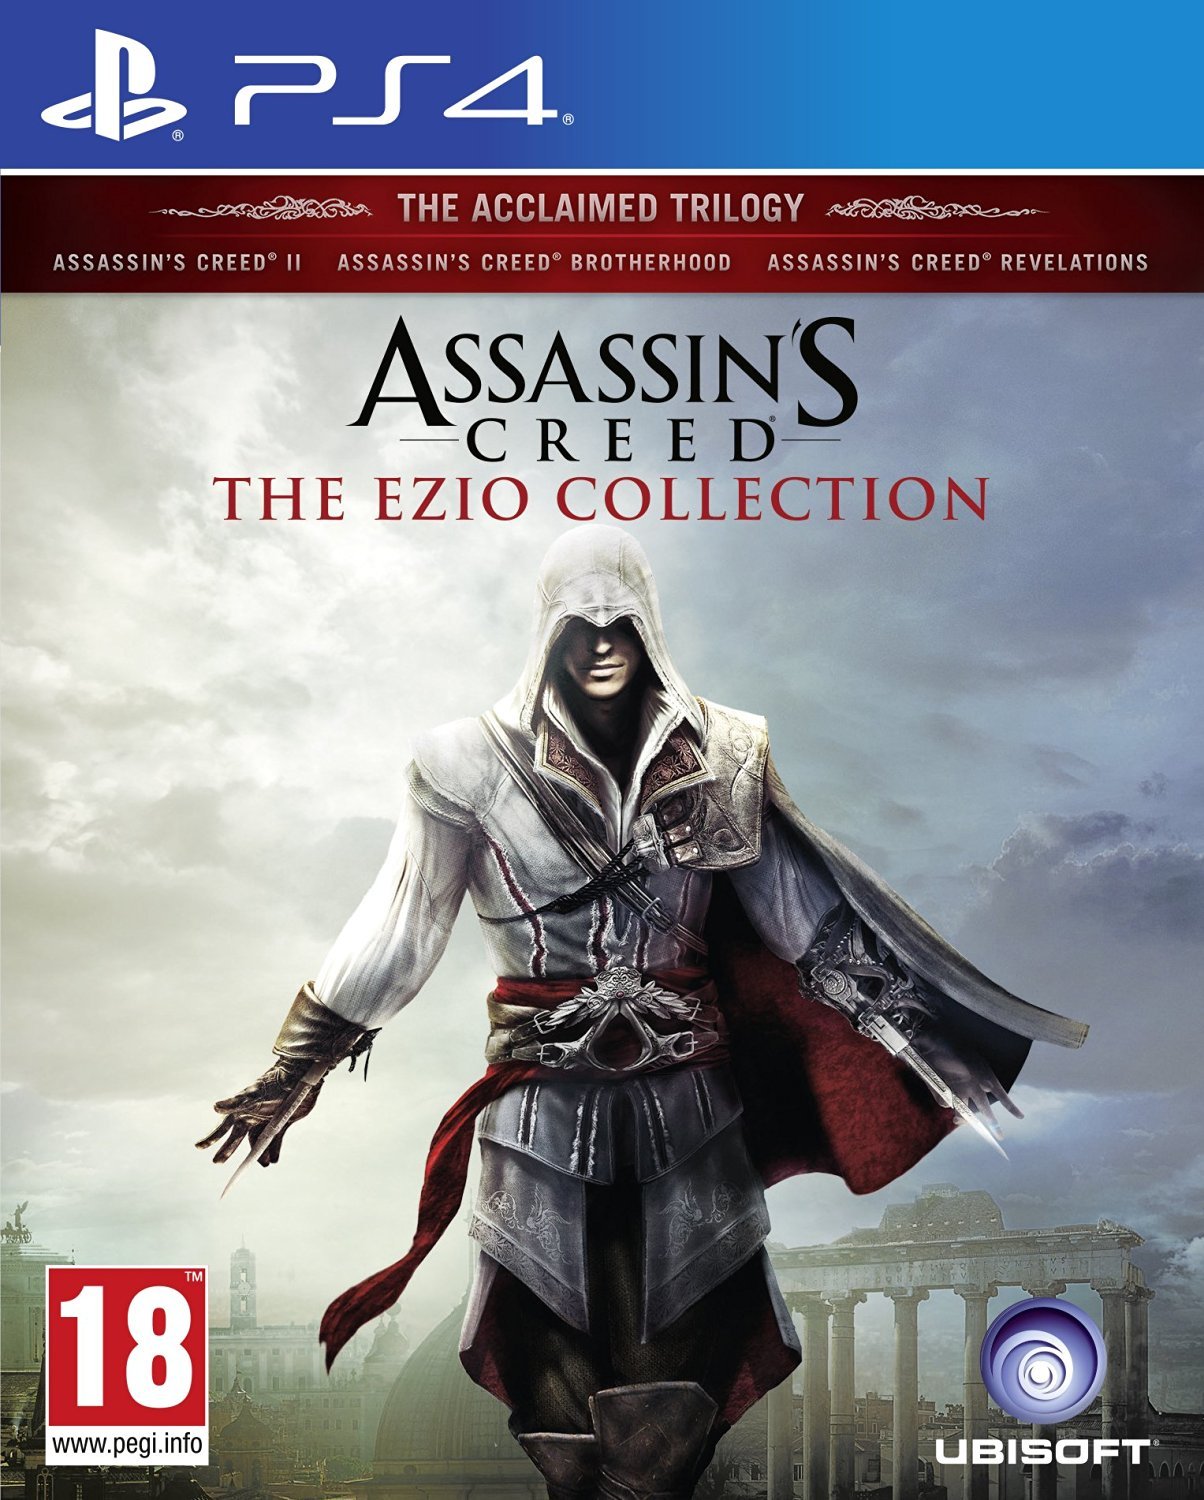 Assassin's Creed: The Ezio Collection (Nordic) - Videospill og konsoller